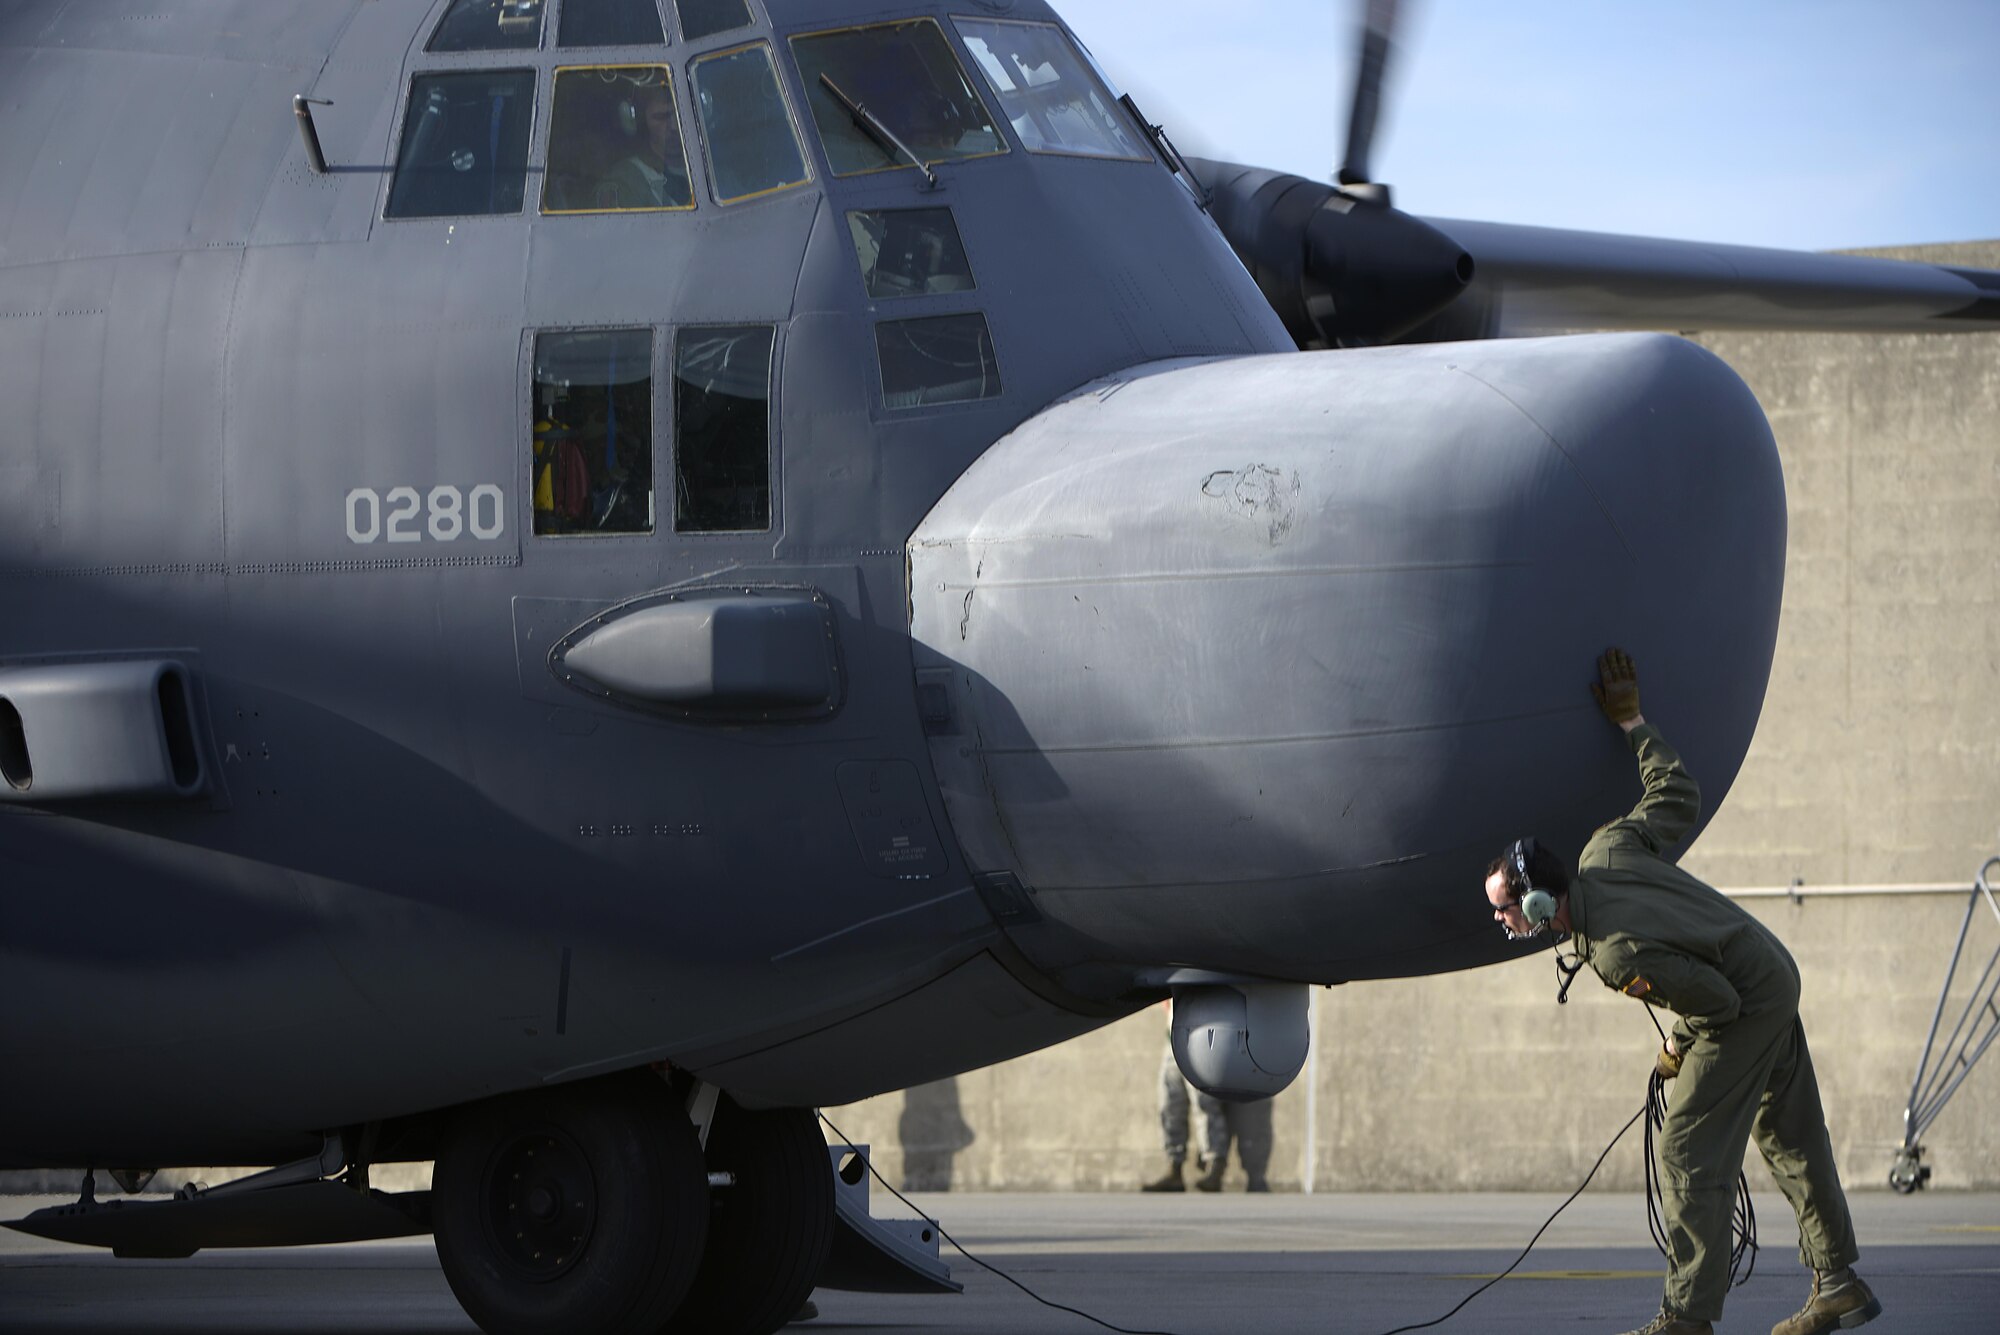 U.S. Air Force Staff Sgt. Daniel Sterns, a loadmaster from the 1st Special Operations Squadron performs pre-flight checks for a 1st SOS MC-130H Combat Talon II before a formation flight on Kadena Air Base, Japan, May 14, 2015. The 1st Special Operations Squadron operates the MC-130H providing infiltration, exfiltration, and resupply of special operations forces and equipment in hostile or denied territory.  By conducting formation flight, aircrews and maintainers test and validate their ability to efficiently generate aircraft and to quickly infiltrate and exfiltrate large numbers of ground forces.  (U.S. Air Force photo by Staff Sgt. Maeson L. Elleman)